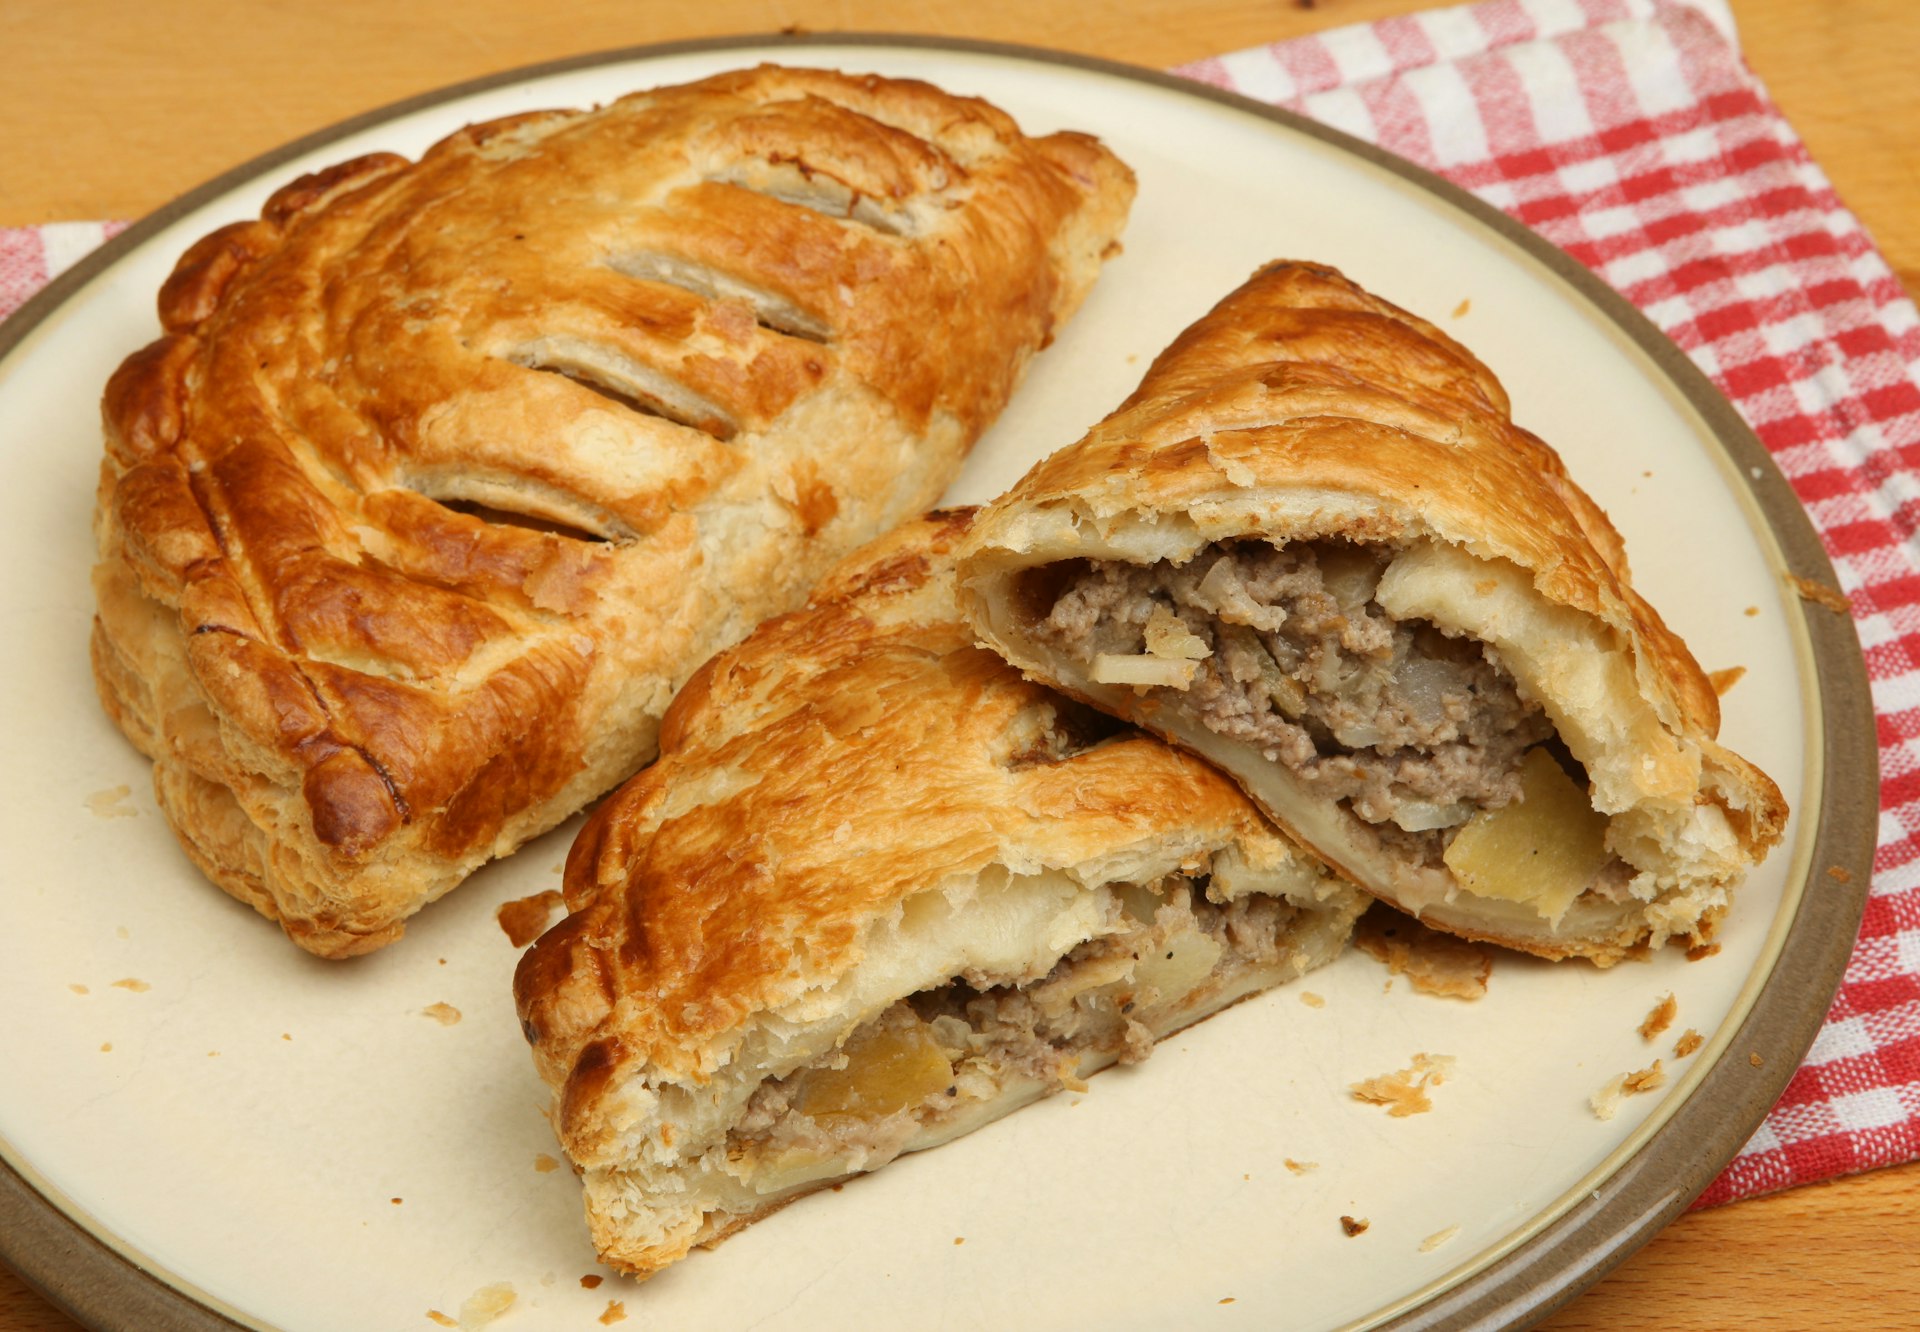 Freshly baked Cornish pasties on a plate. The pasty has been cut in half, revealing its meaty content that's wrapped in baked pastry. 